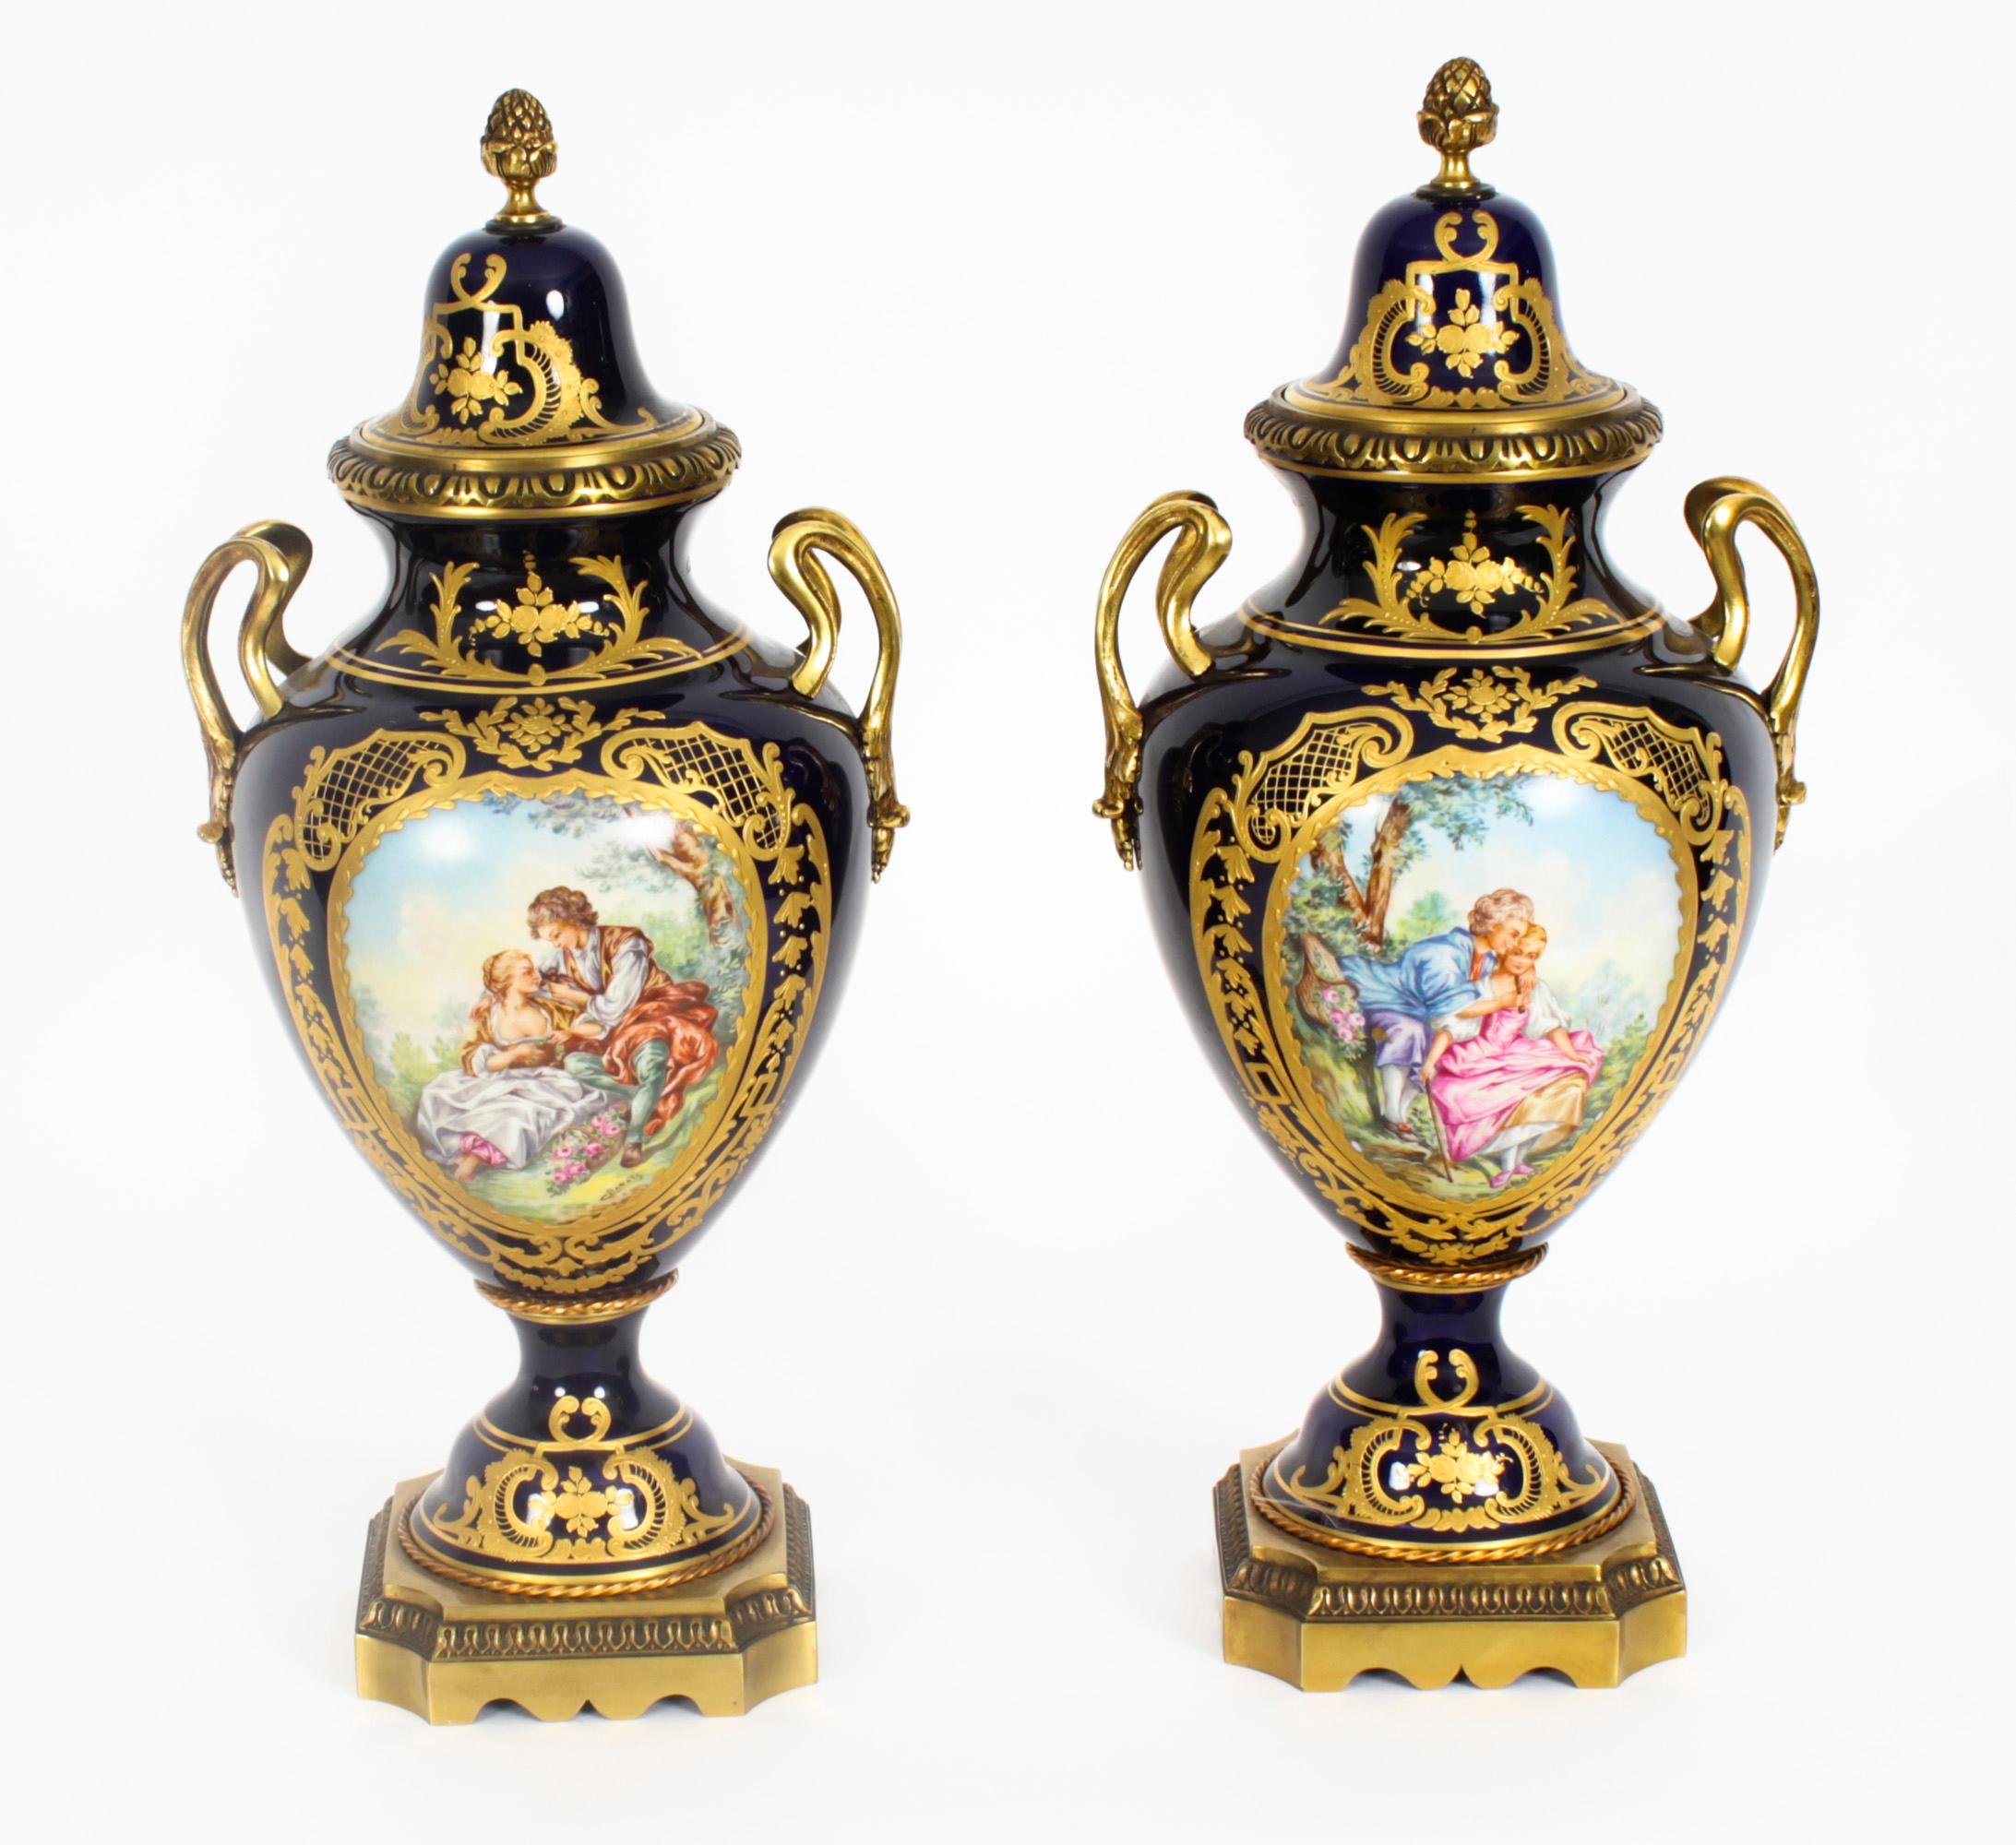 A beautiful and monumental Paris porcelain ormolu mounted three piece garniture set with hand-painted scenes and delicate gilt decoration, Circa 1900 in date. 
 
The set comprising a pair of lidded vases and a two handled oval bowl. The Royal Blue